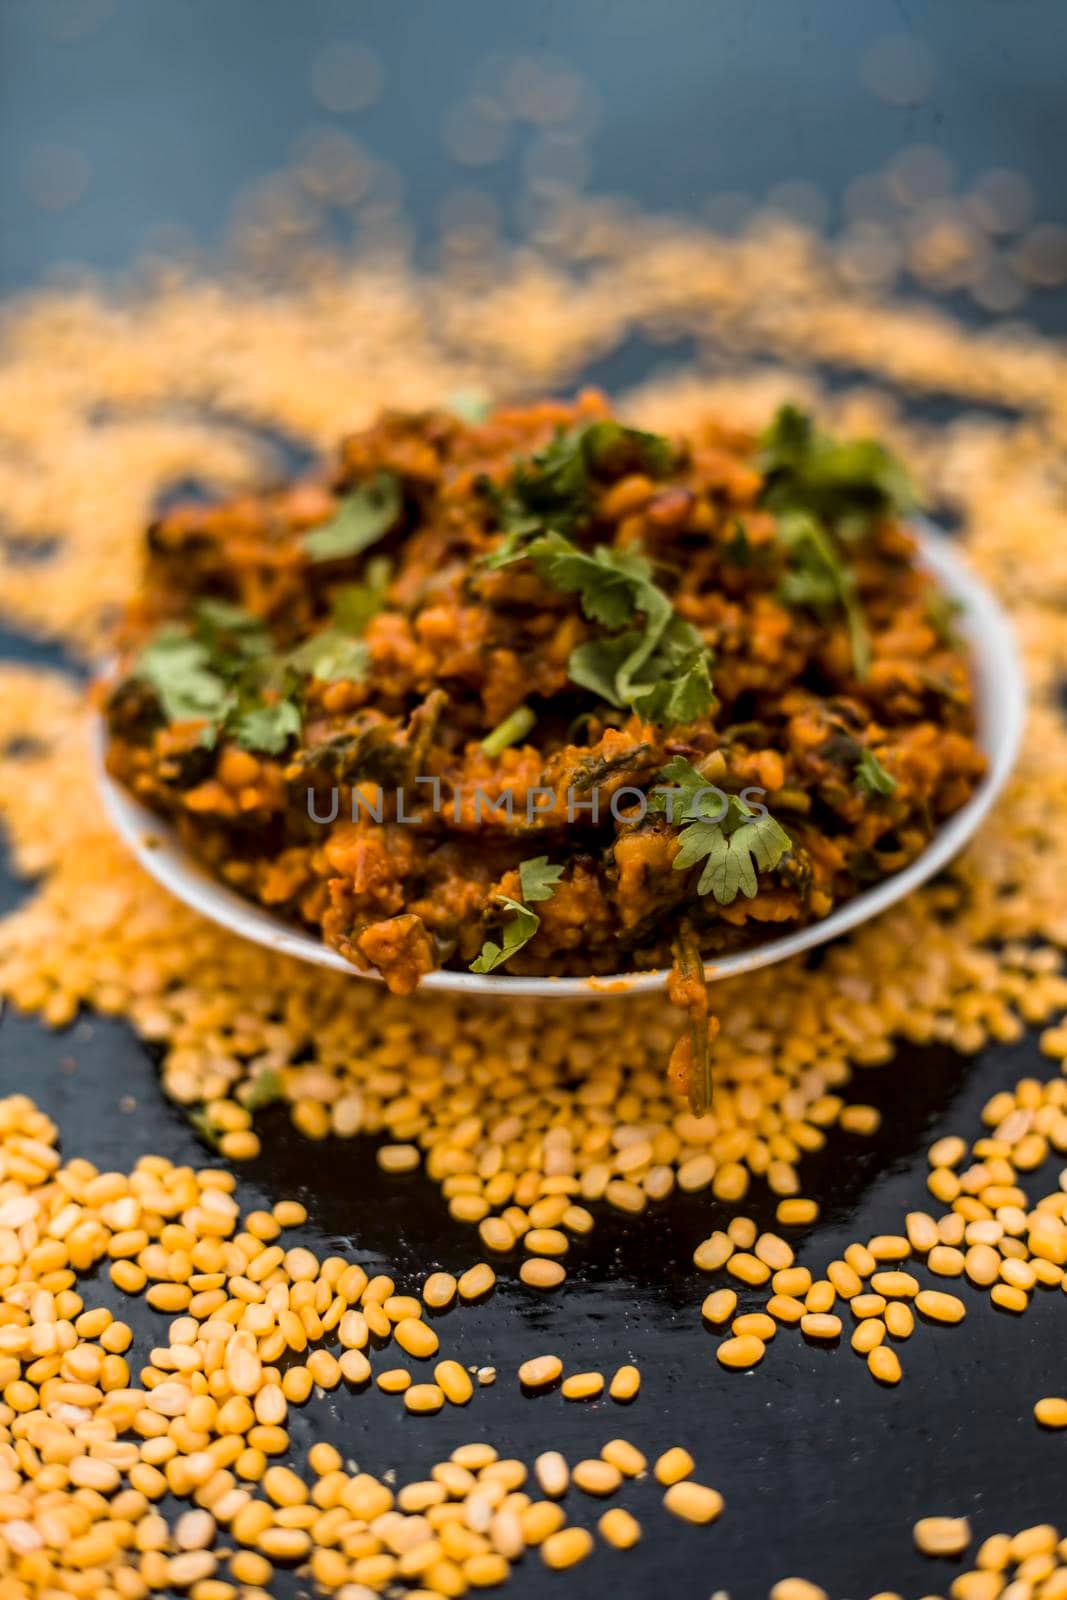 Famous Indian Punjabi dish i.e. Roasted dal with spinach in a glass plate on the wooden surface along with its main ingredients i.e. Unskinned split moong dal.